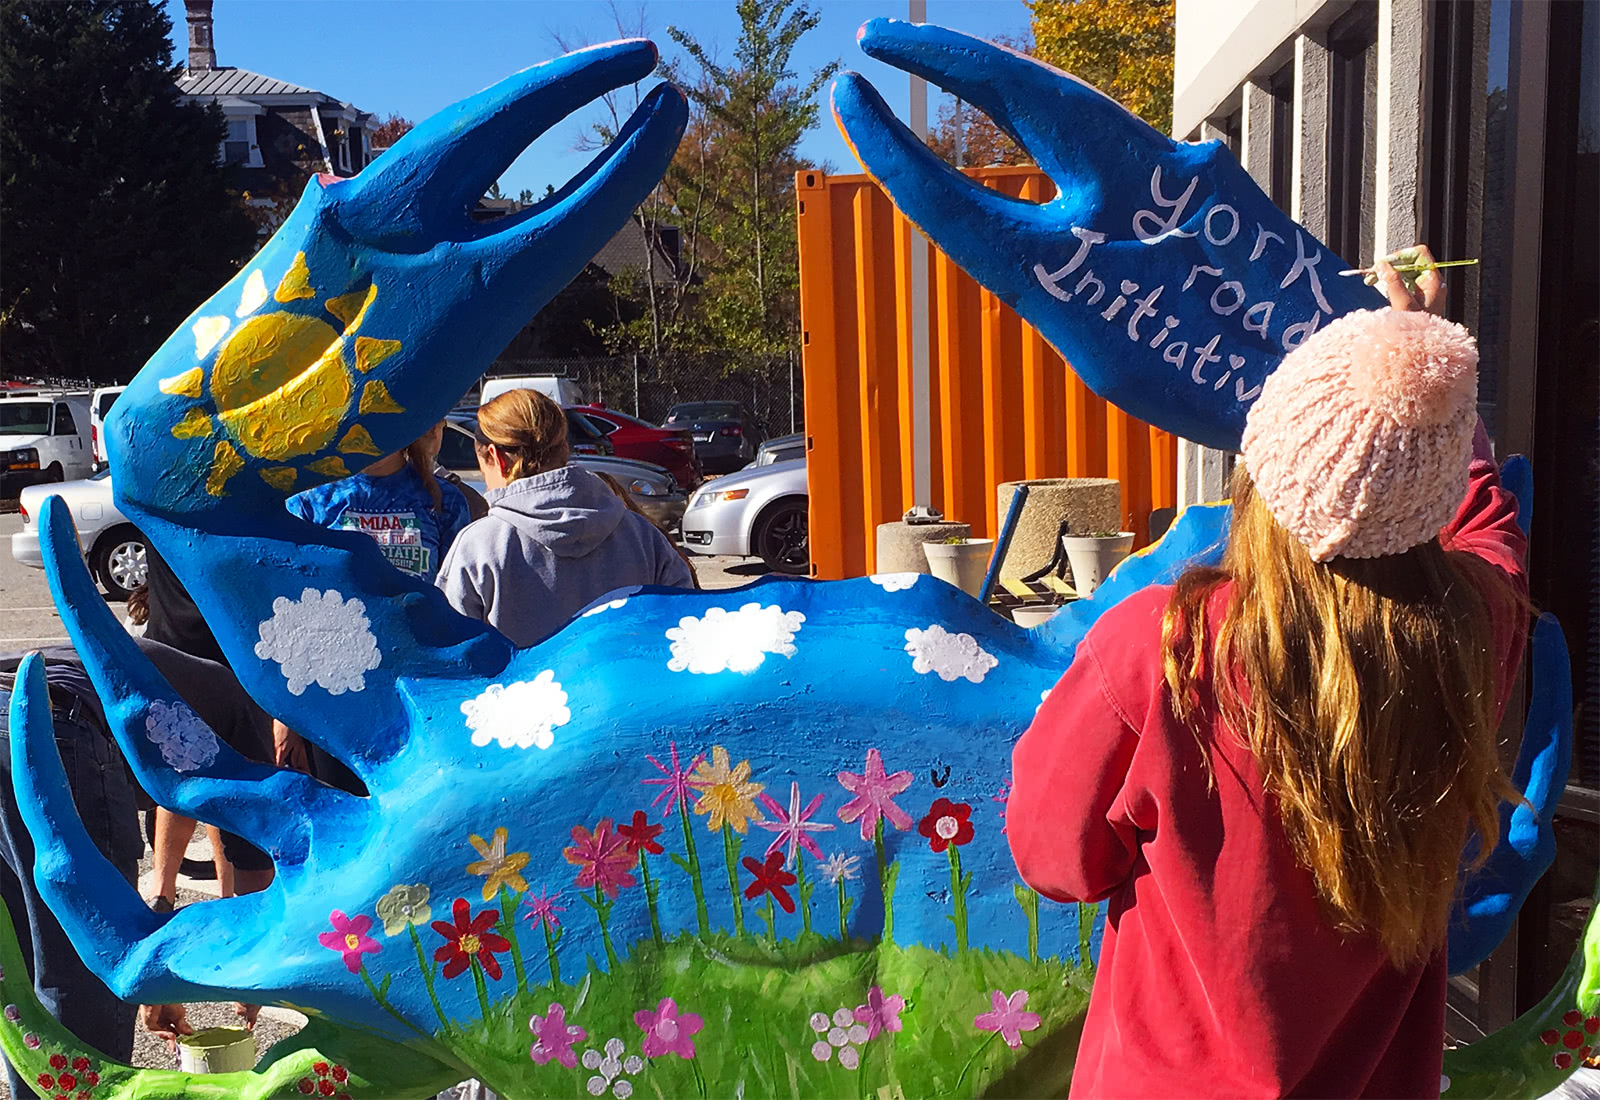 Students painting a large statue of a crab with bright colors that read 'York Road Initiative' outside on a sunny day